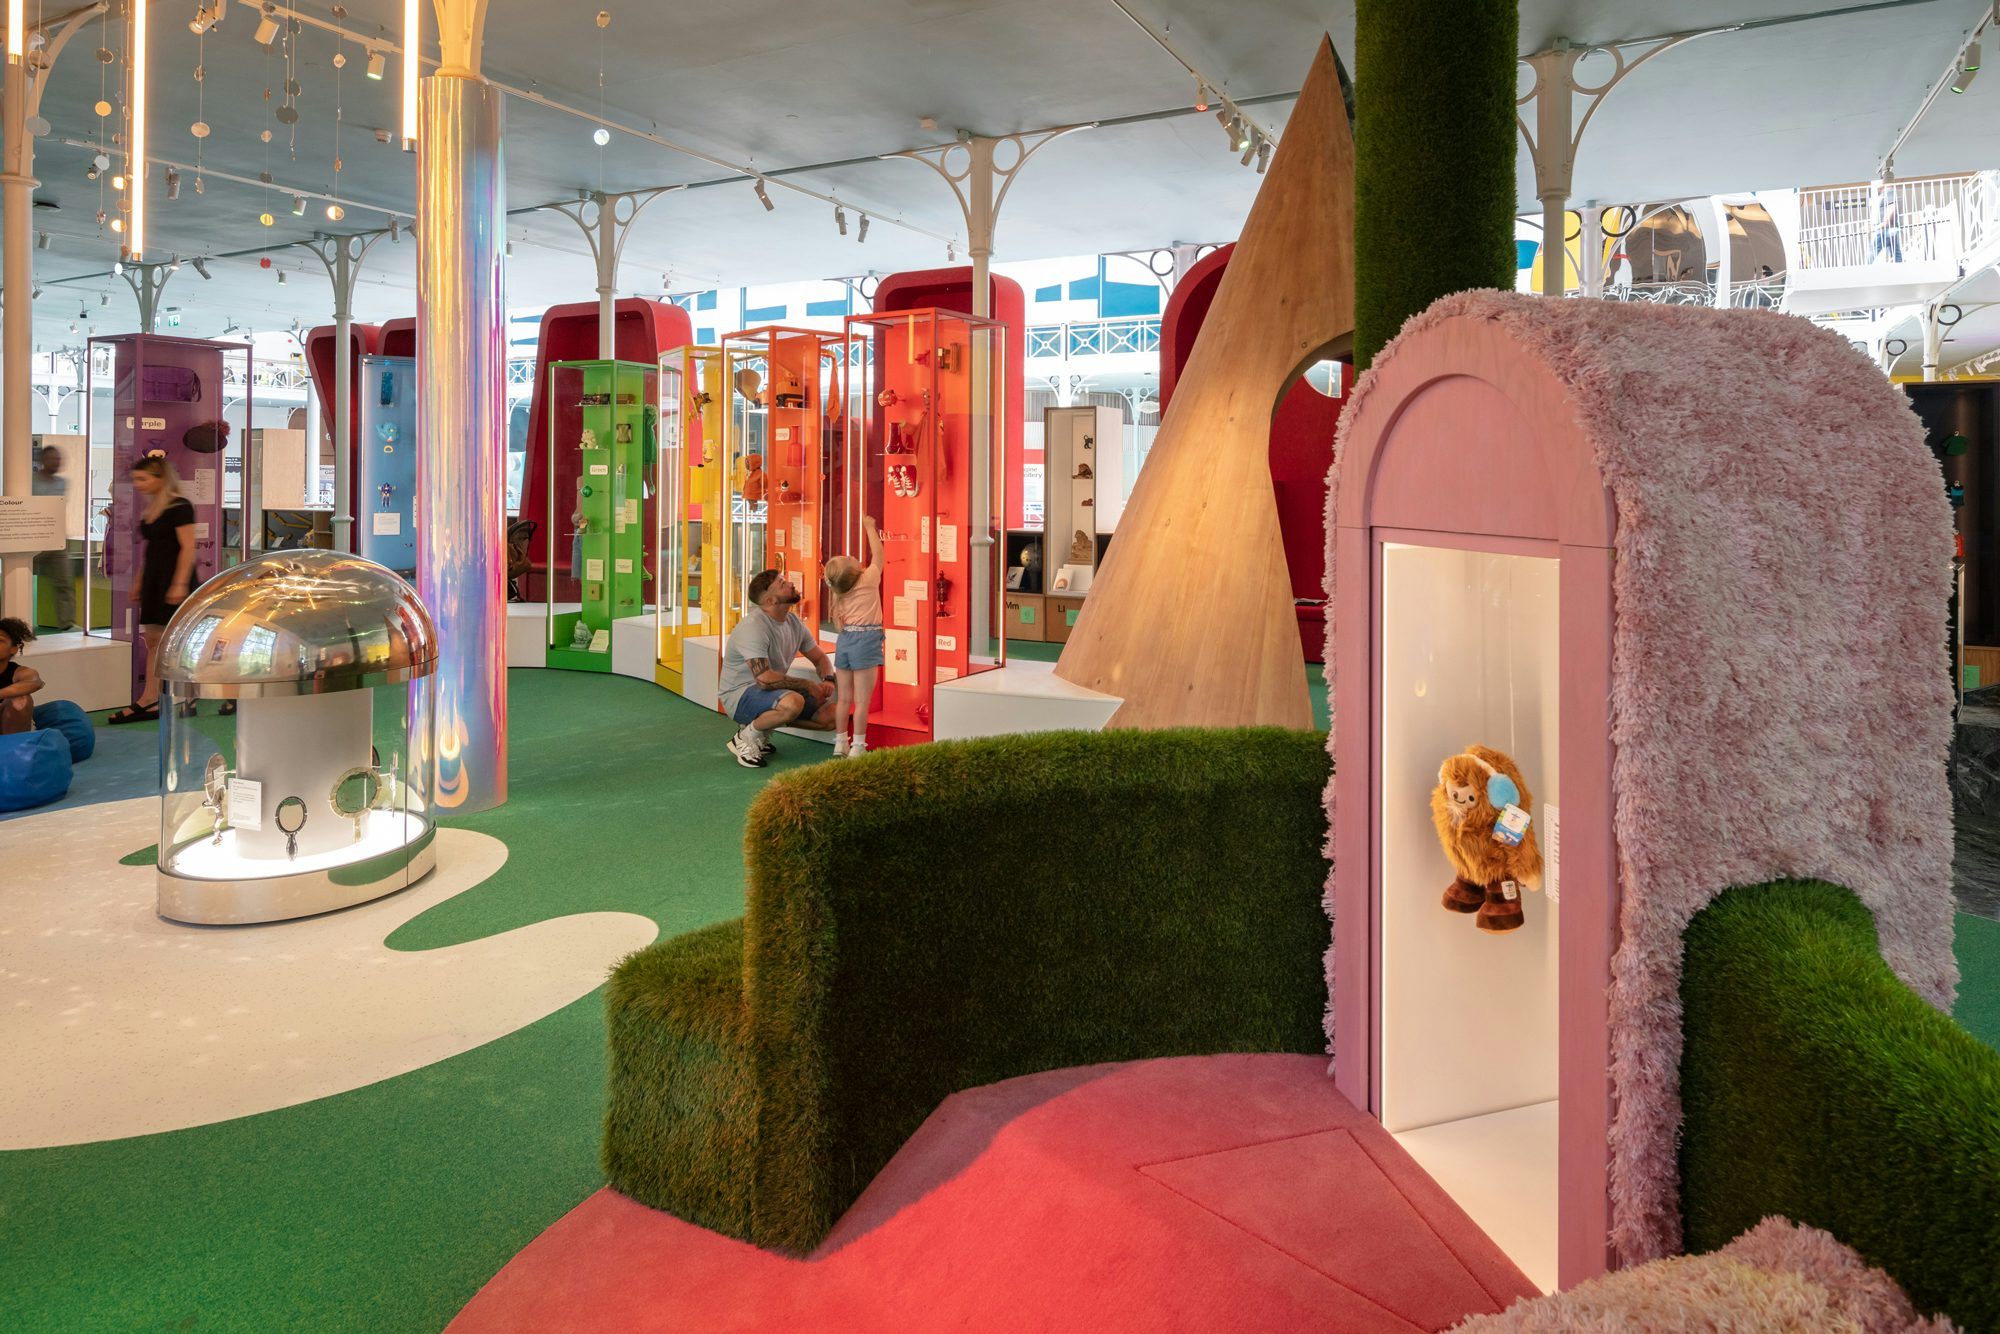 Inside the playful world of the Young V&A